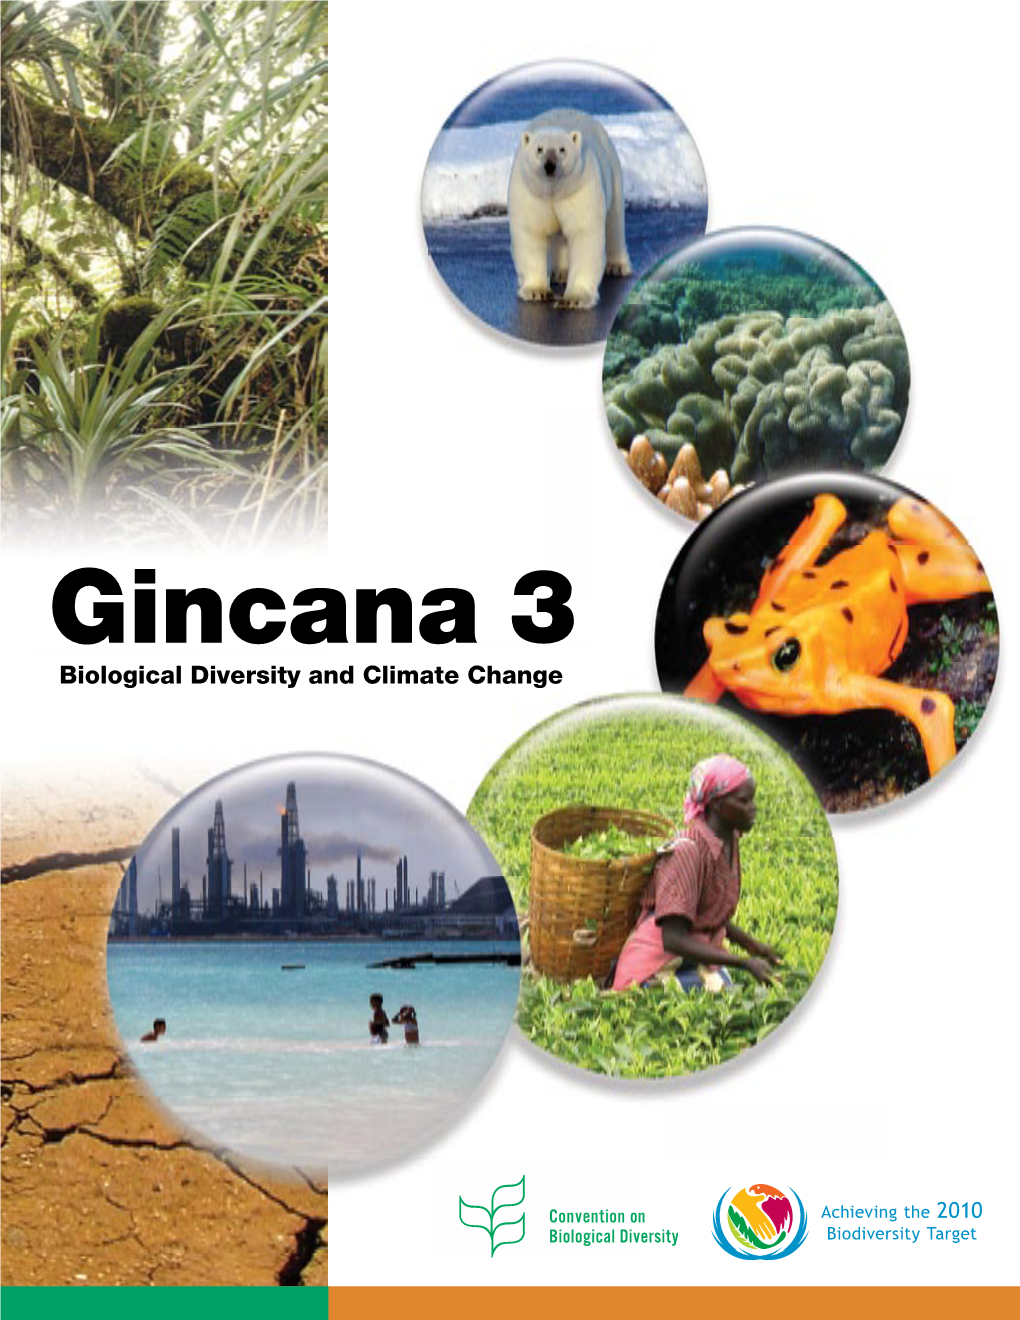 Gincana 3: Biological Diversity and Climate Change